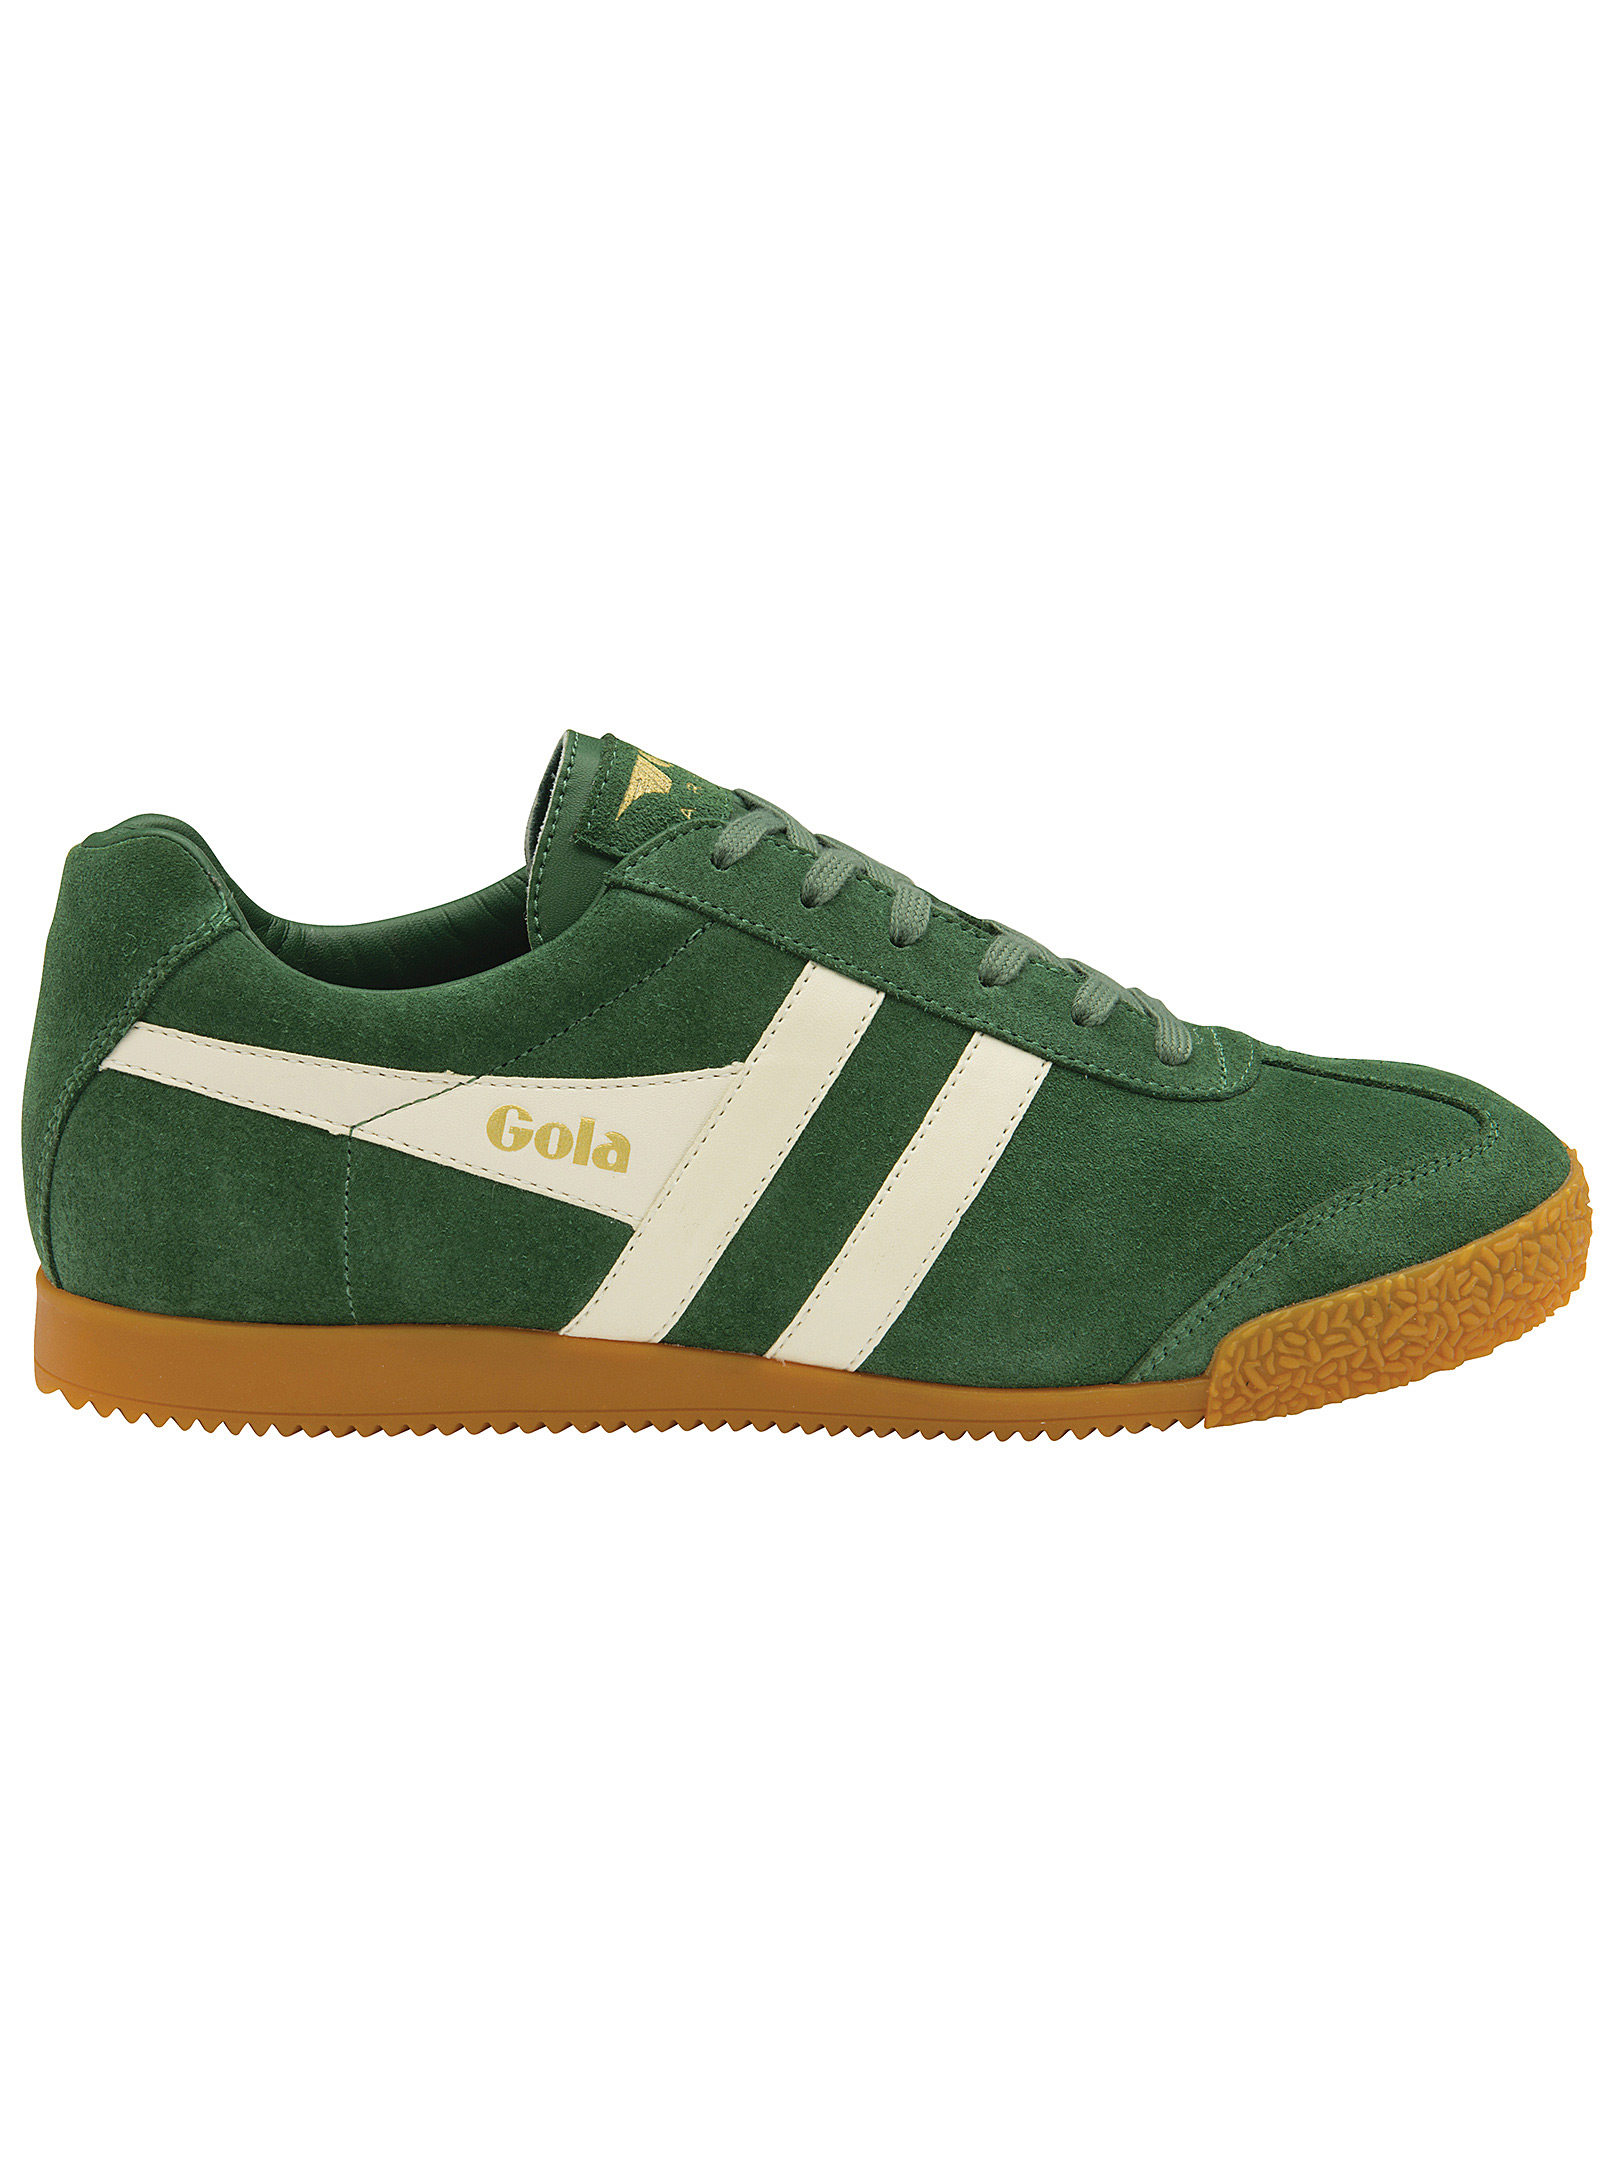 Gola - Chaussures Le Sneaker Harrier Homme